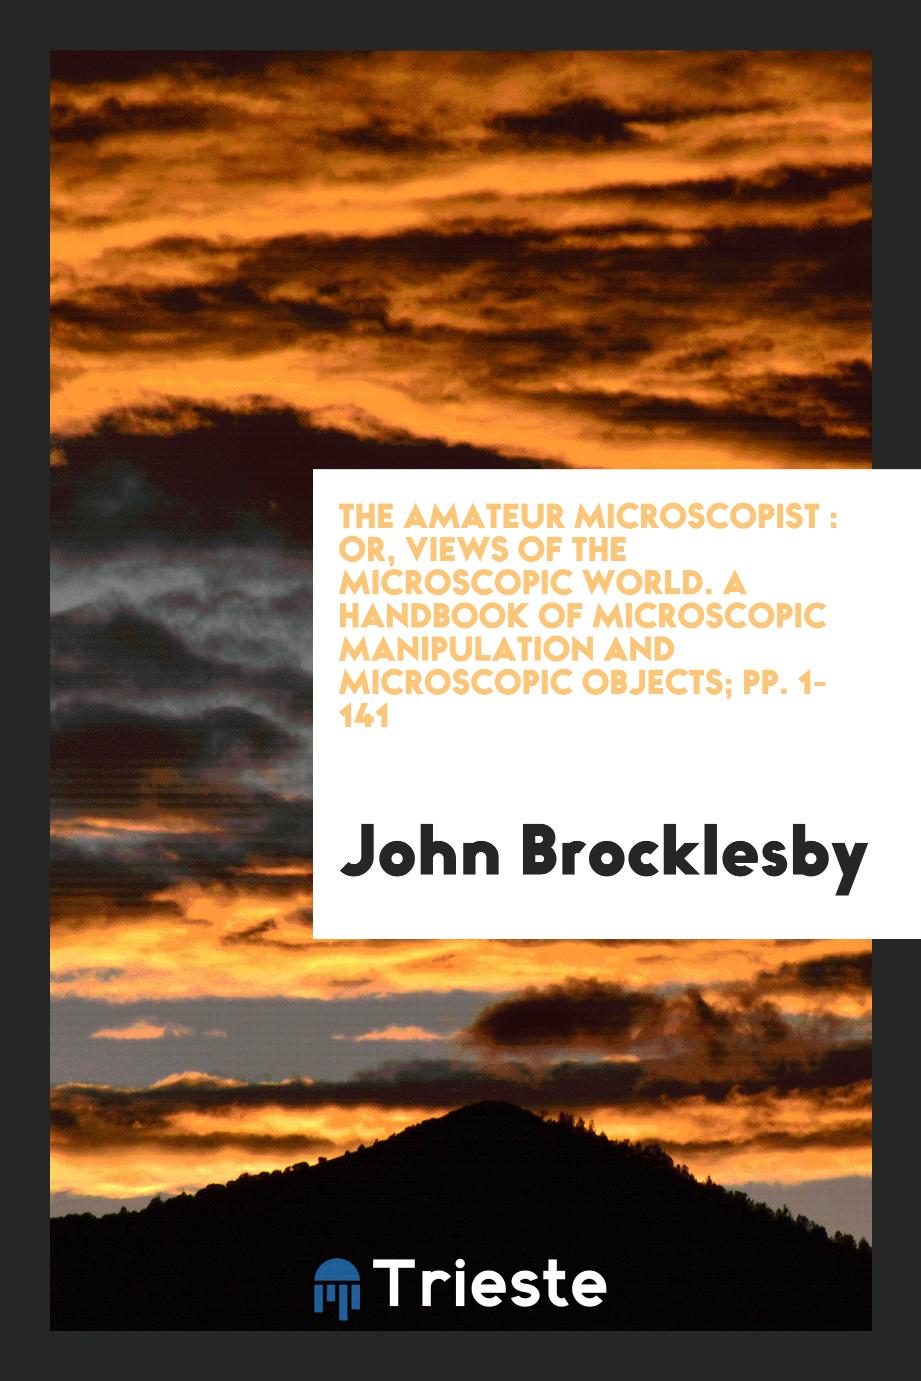 The Amateur Microscopist : Or, Views of the Microscopic World. A Handbook of Microscopic Manipulation and Microscopic Objects; pp. 1-141